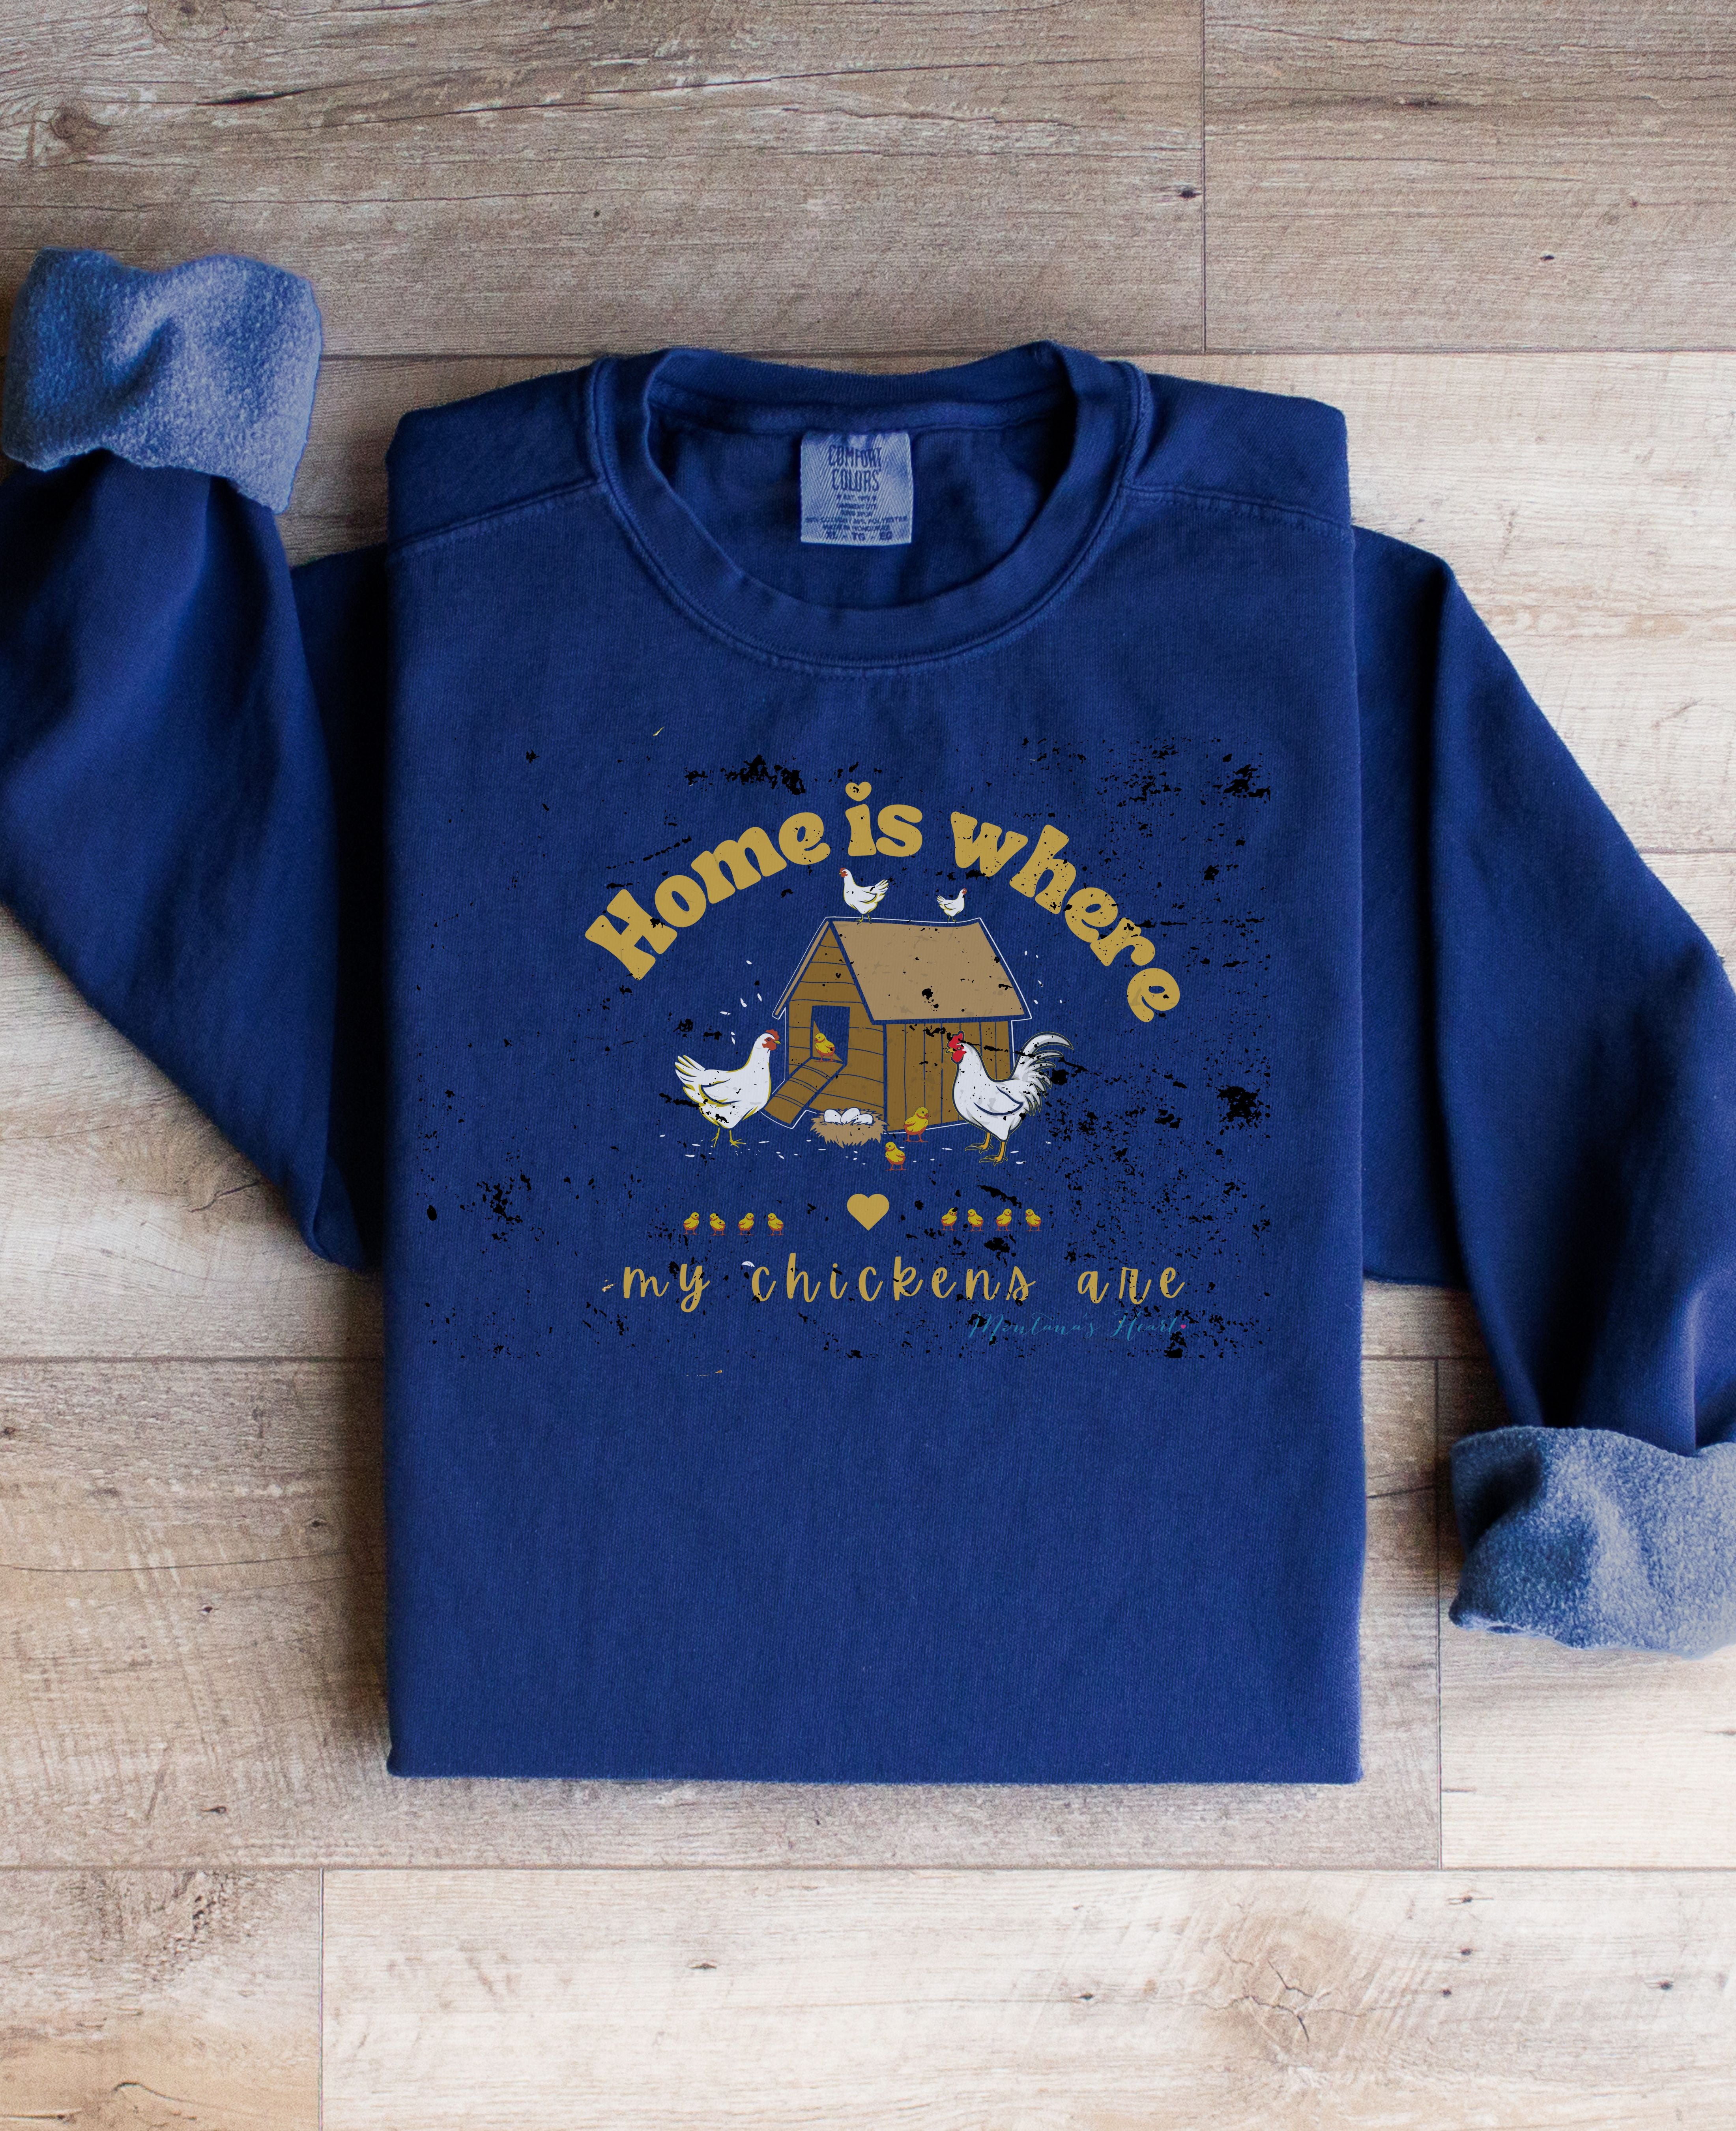 Home is where my chickens are, Ladies  Garment-Dyed Sweatshirt.